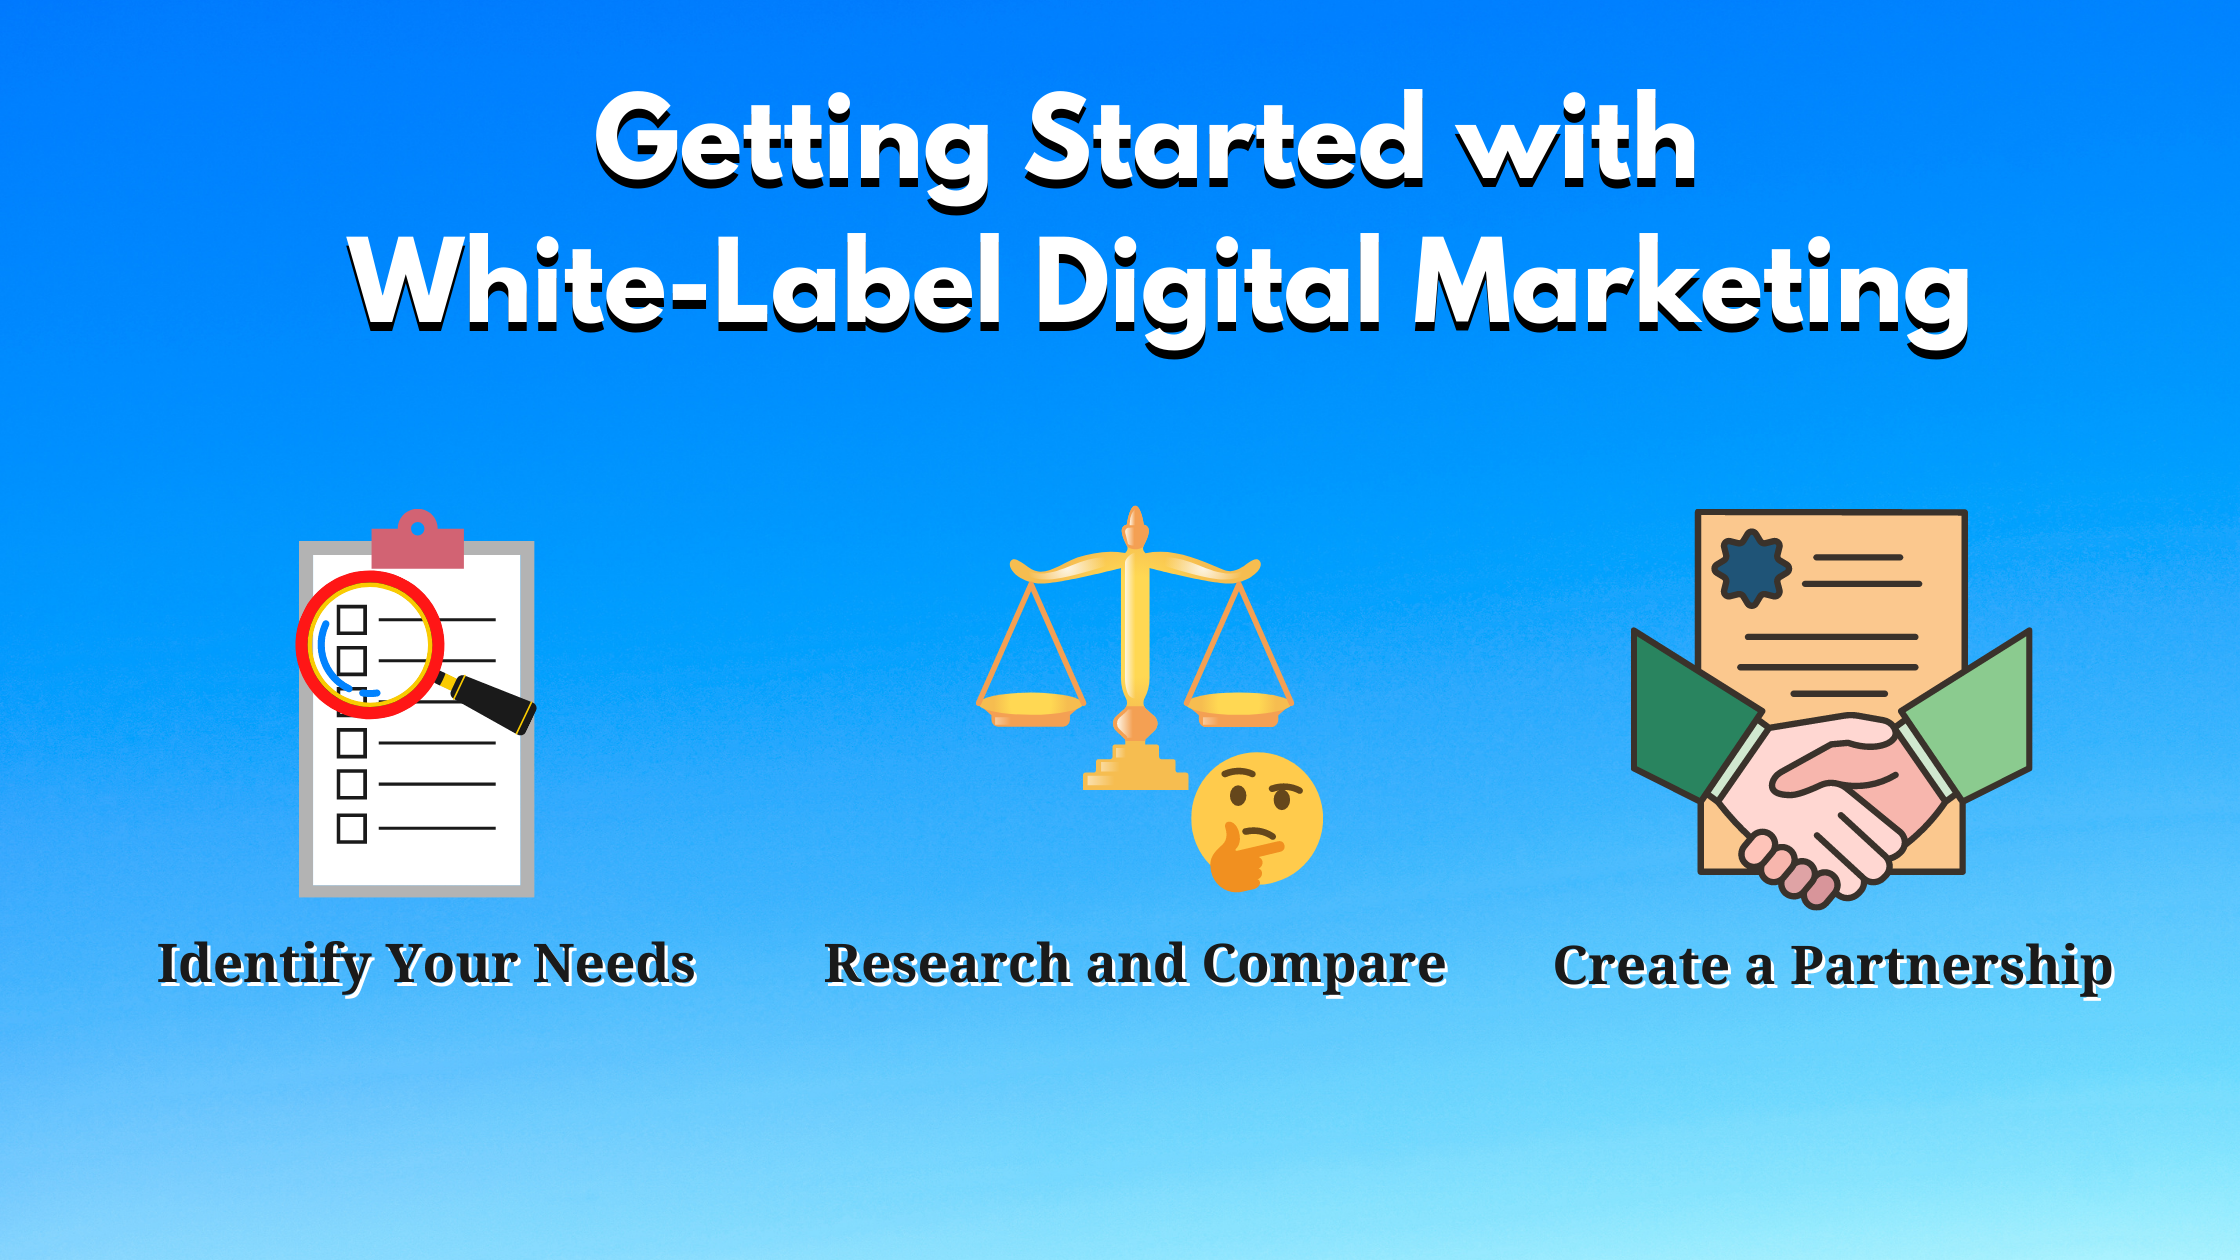 Getting Started with White-Label Digital Marketing